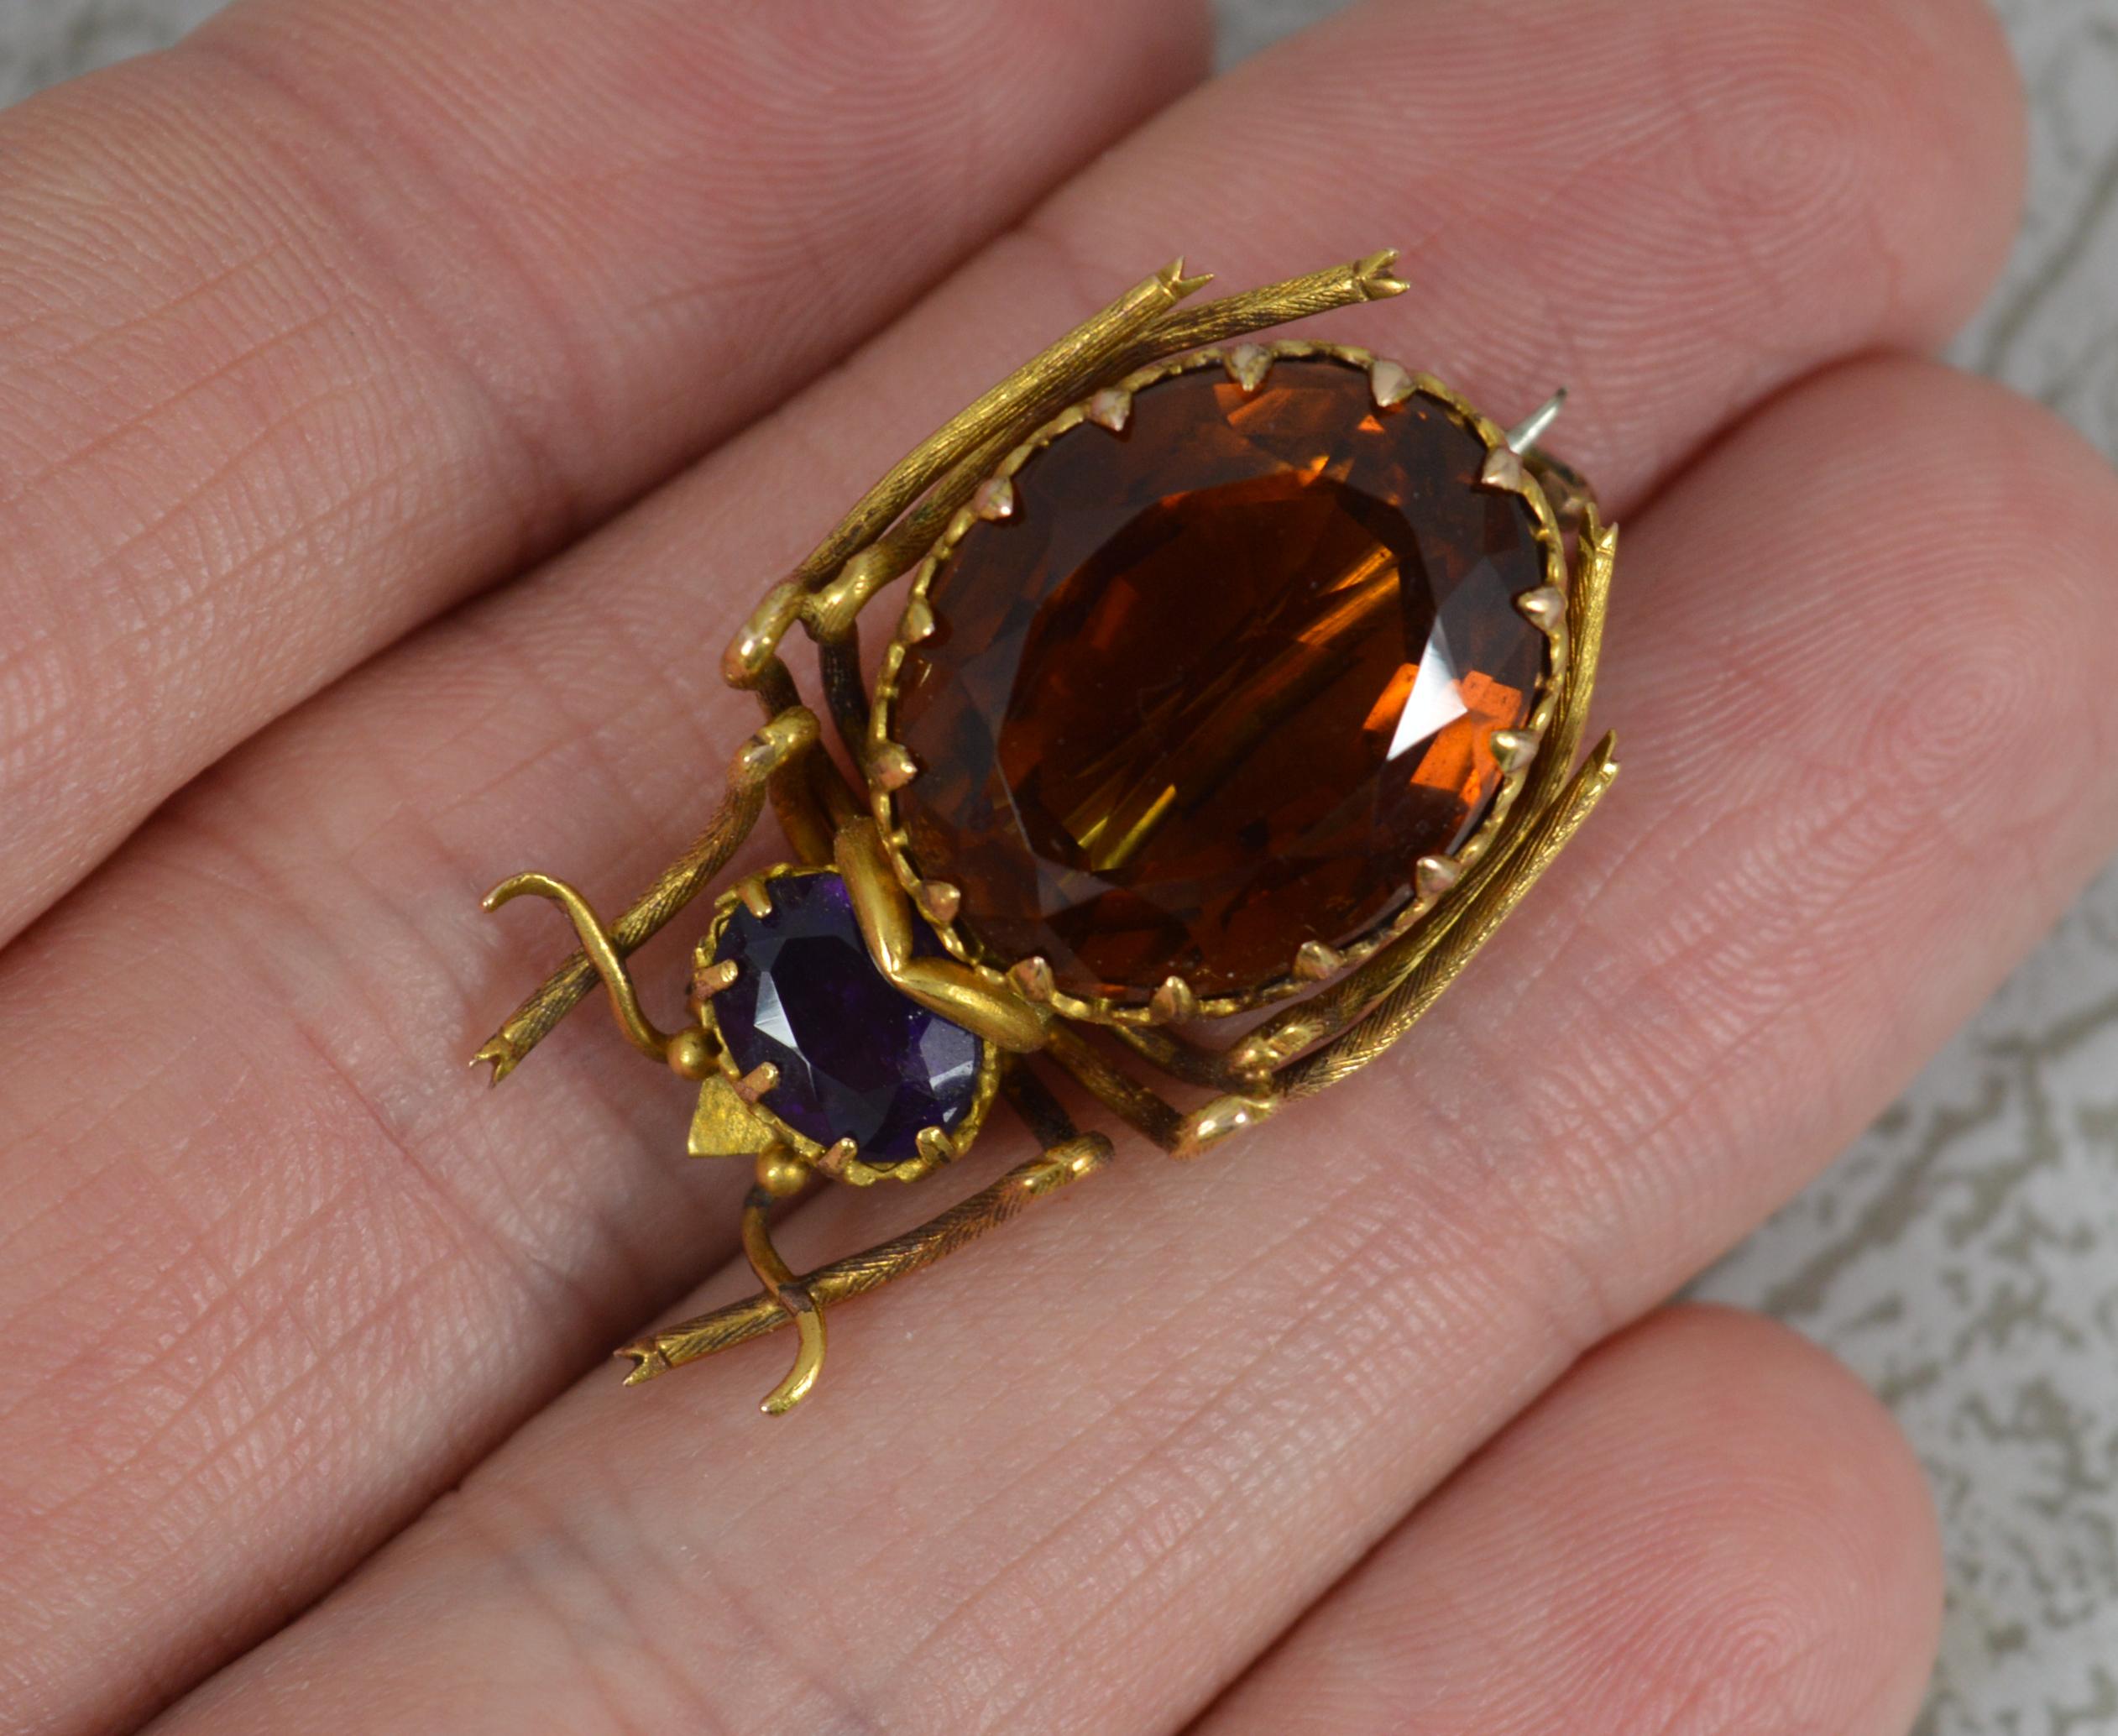 A superb late Victorian period brooch.
Solid 15 carat yellow gold example.
Formed as a beetle or insect. Designed with a large oval deep orange citrine to the body and a smaller oval deep purple amethyst.

CONDITION ; Excellent for age. Crisp